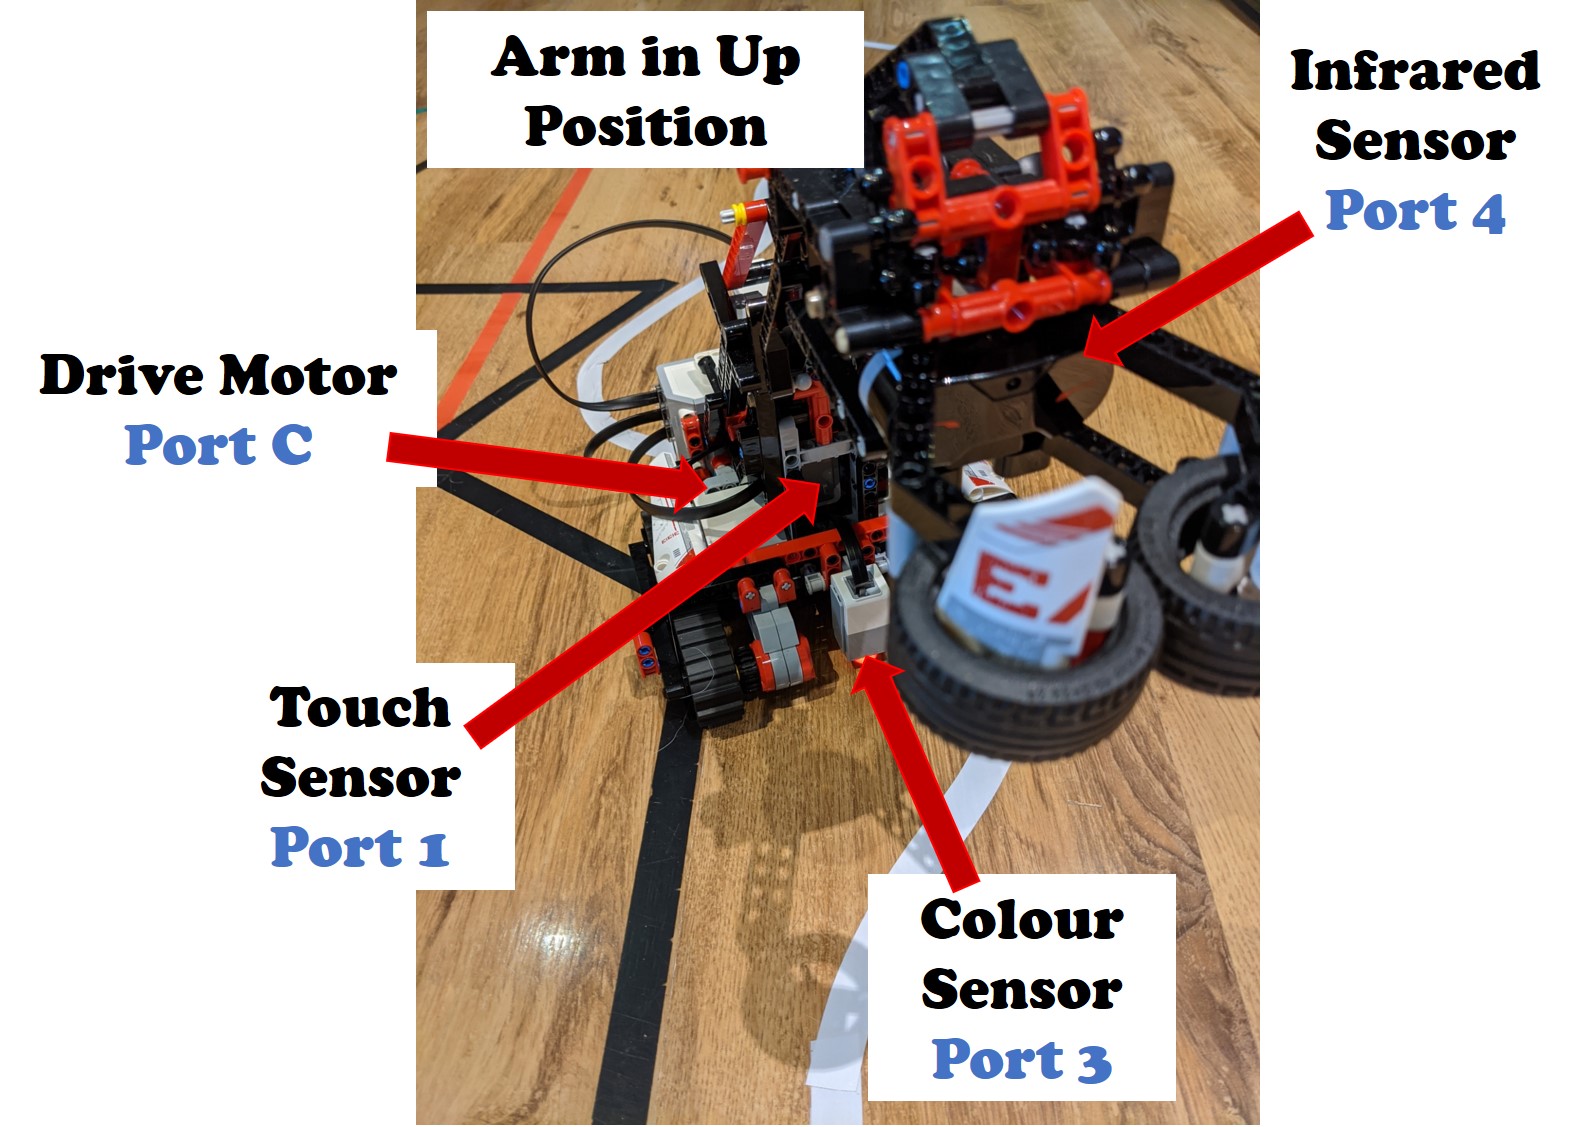 Front aspect with the arm up and closed to reveal the presence of a touch sensor connected to port 1 (for calibrating the arm mechanism and as a cut off to prevent damage), and a colour sensor aimed at the floor central to the unit.